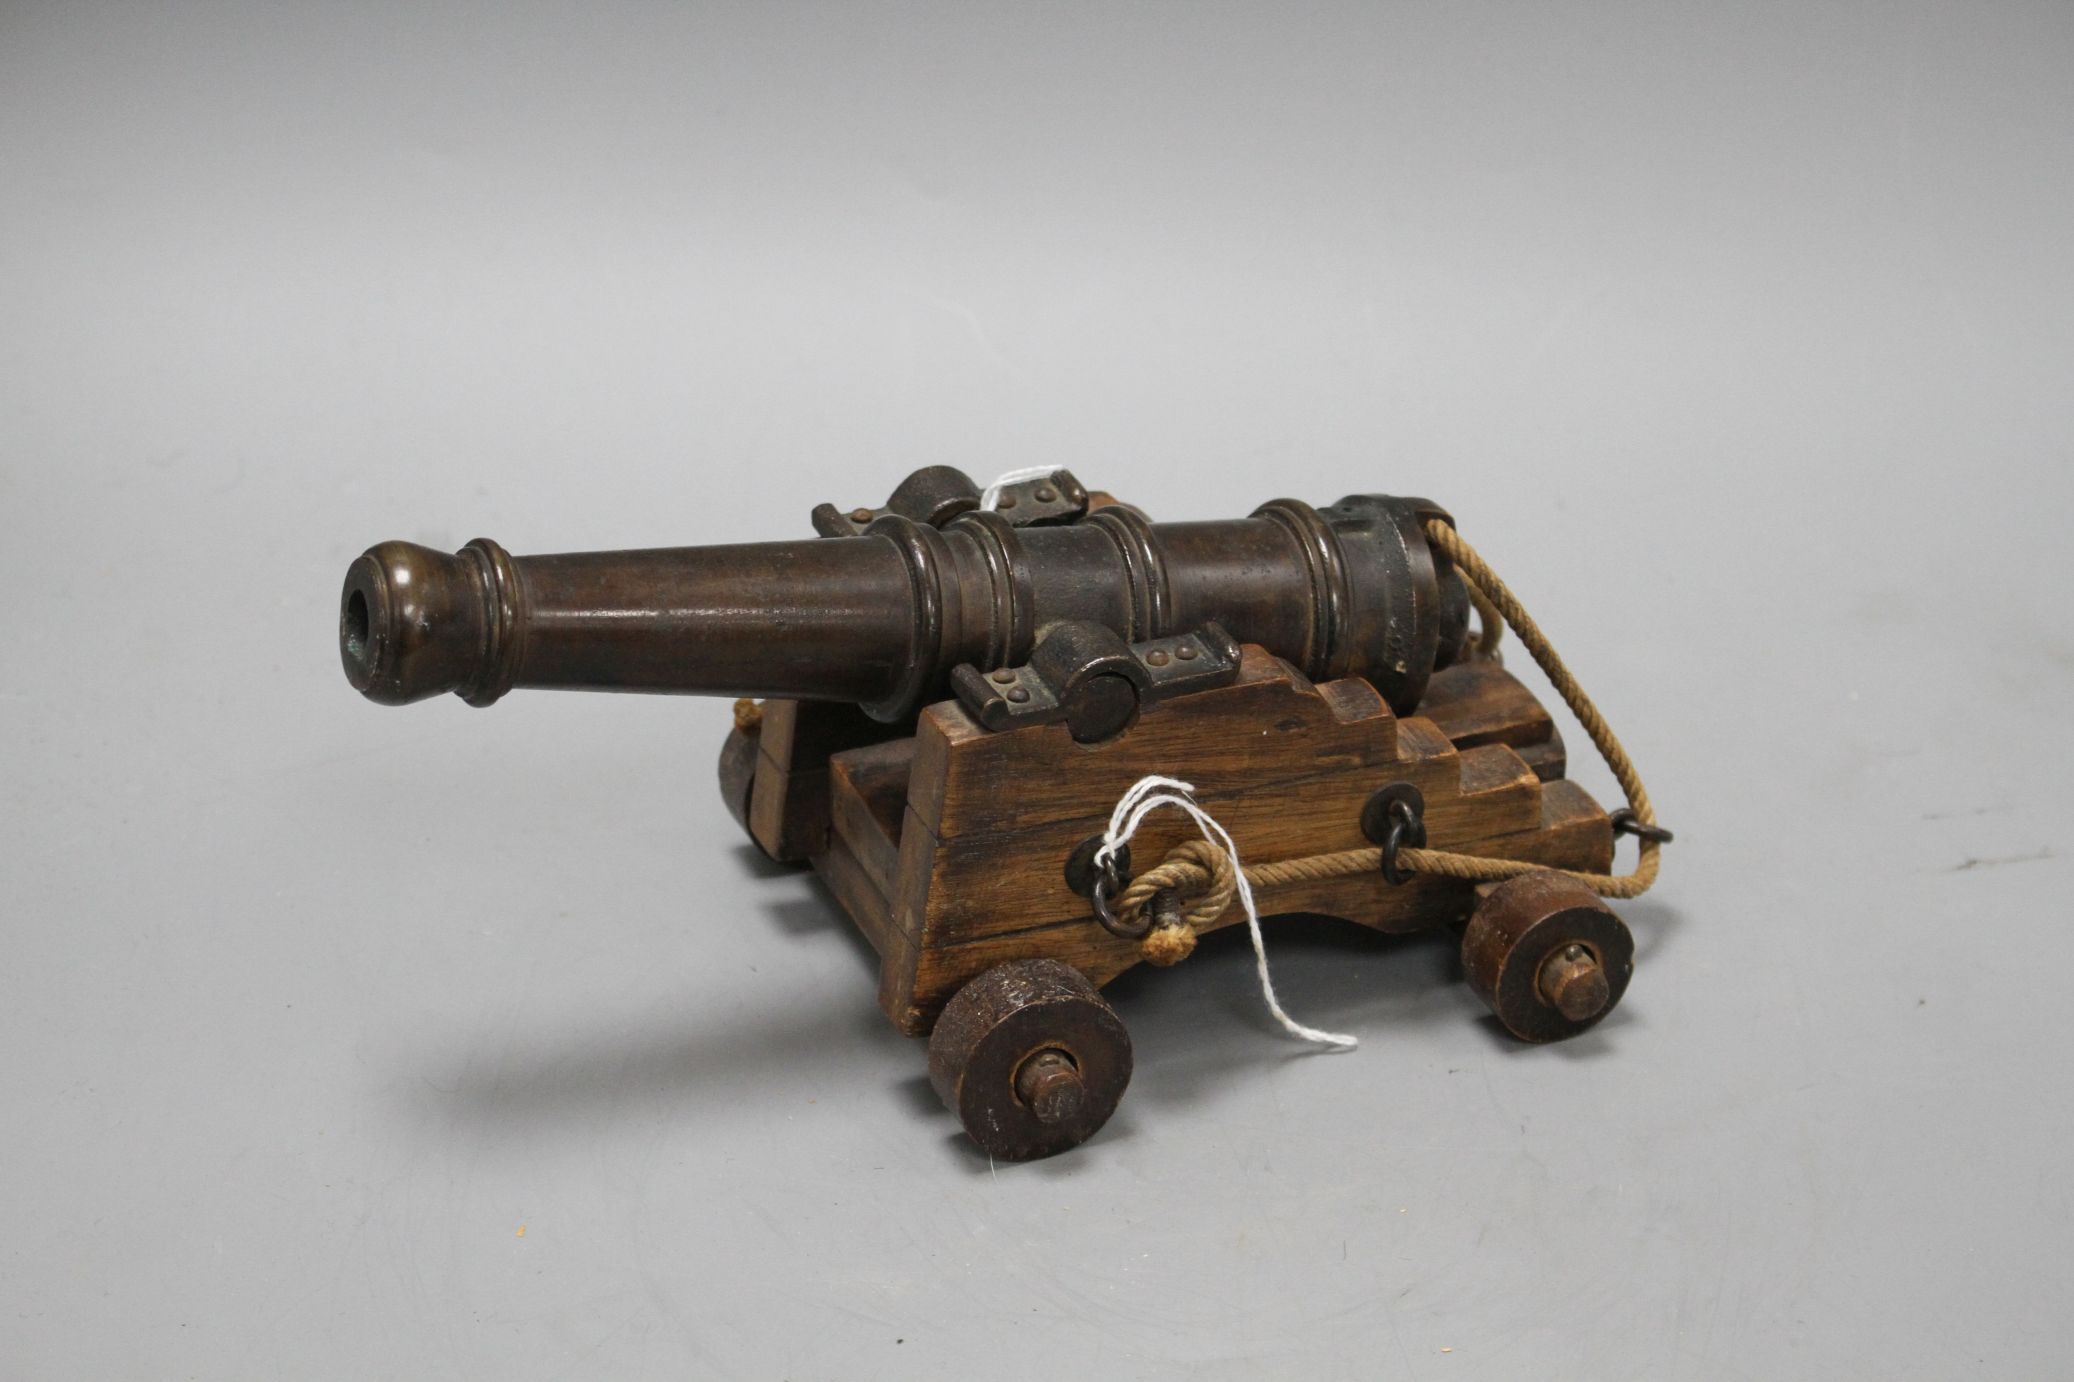 An early 20th century bronze model of a Naval cannon, on wooden trunnion base, length 25cm - Image 2 of 6